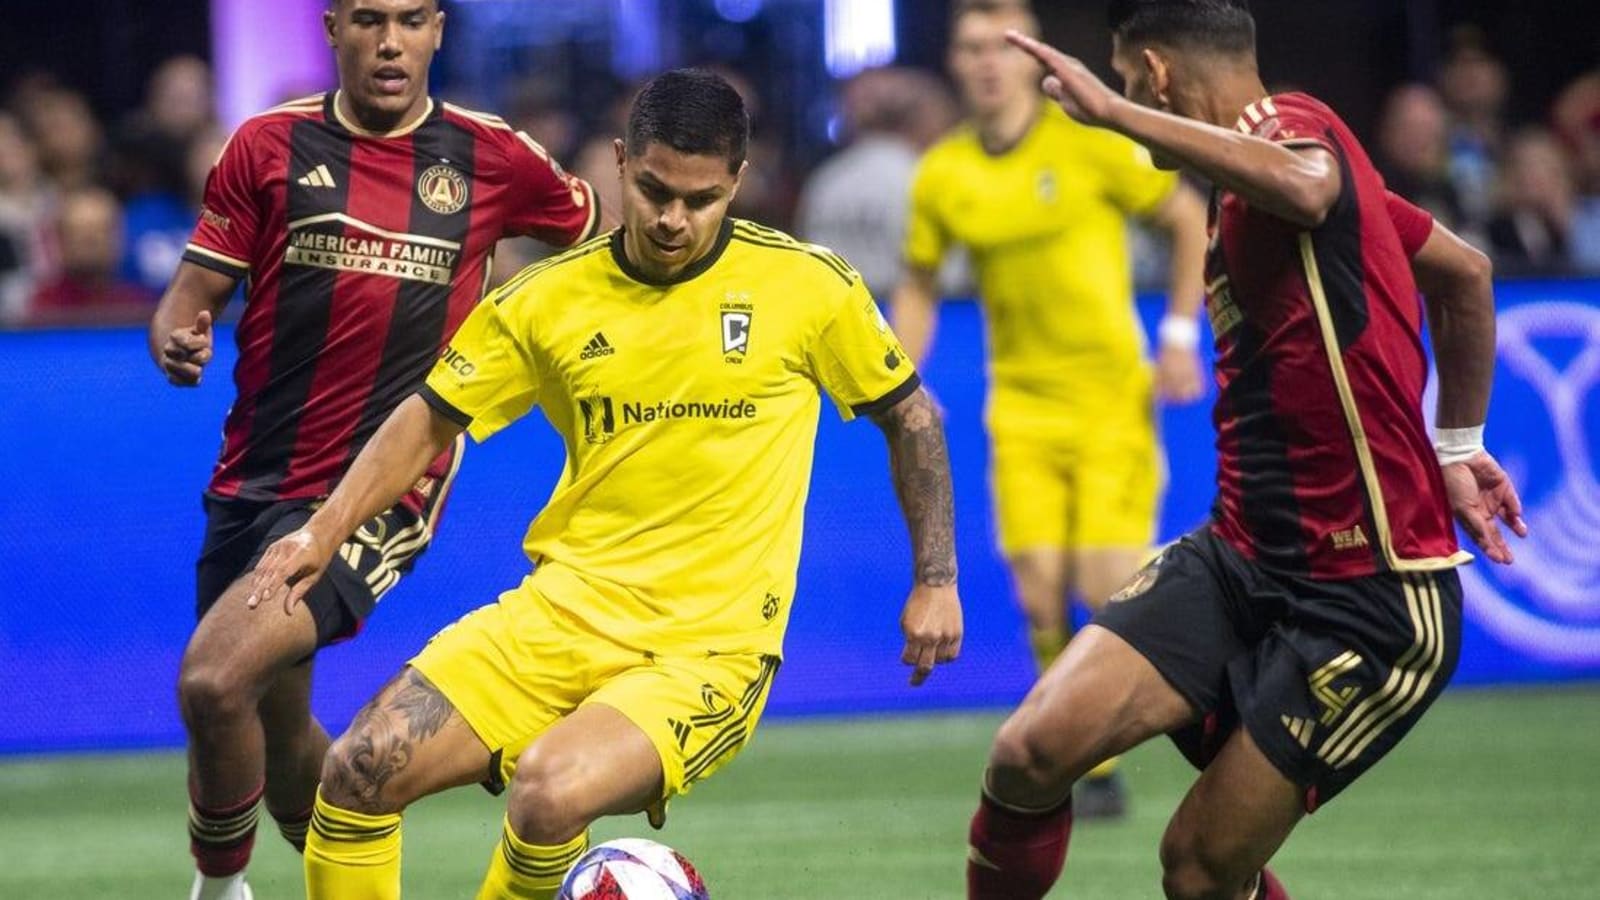 Late score earns Atlanta United draw with Crew